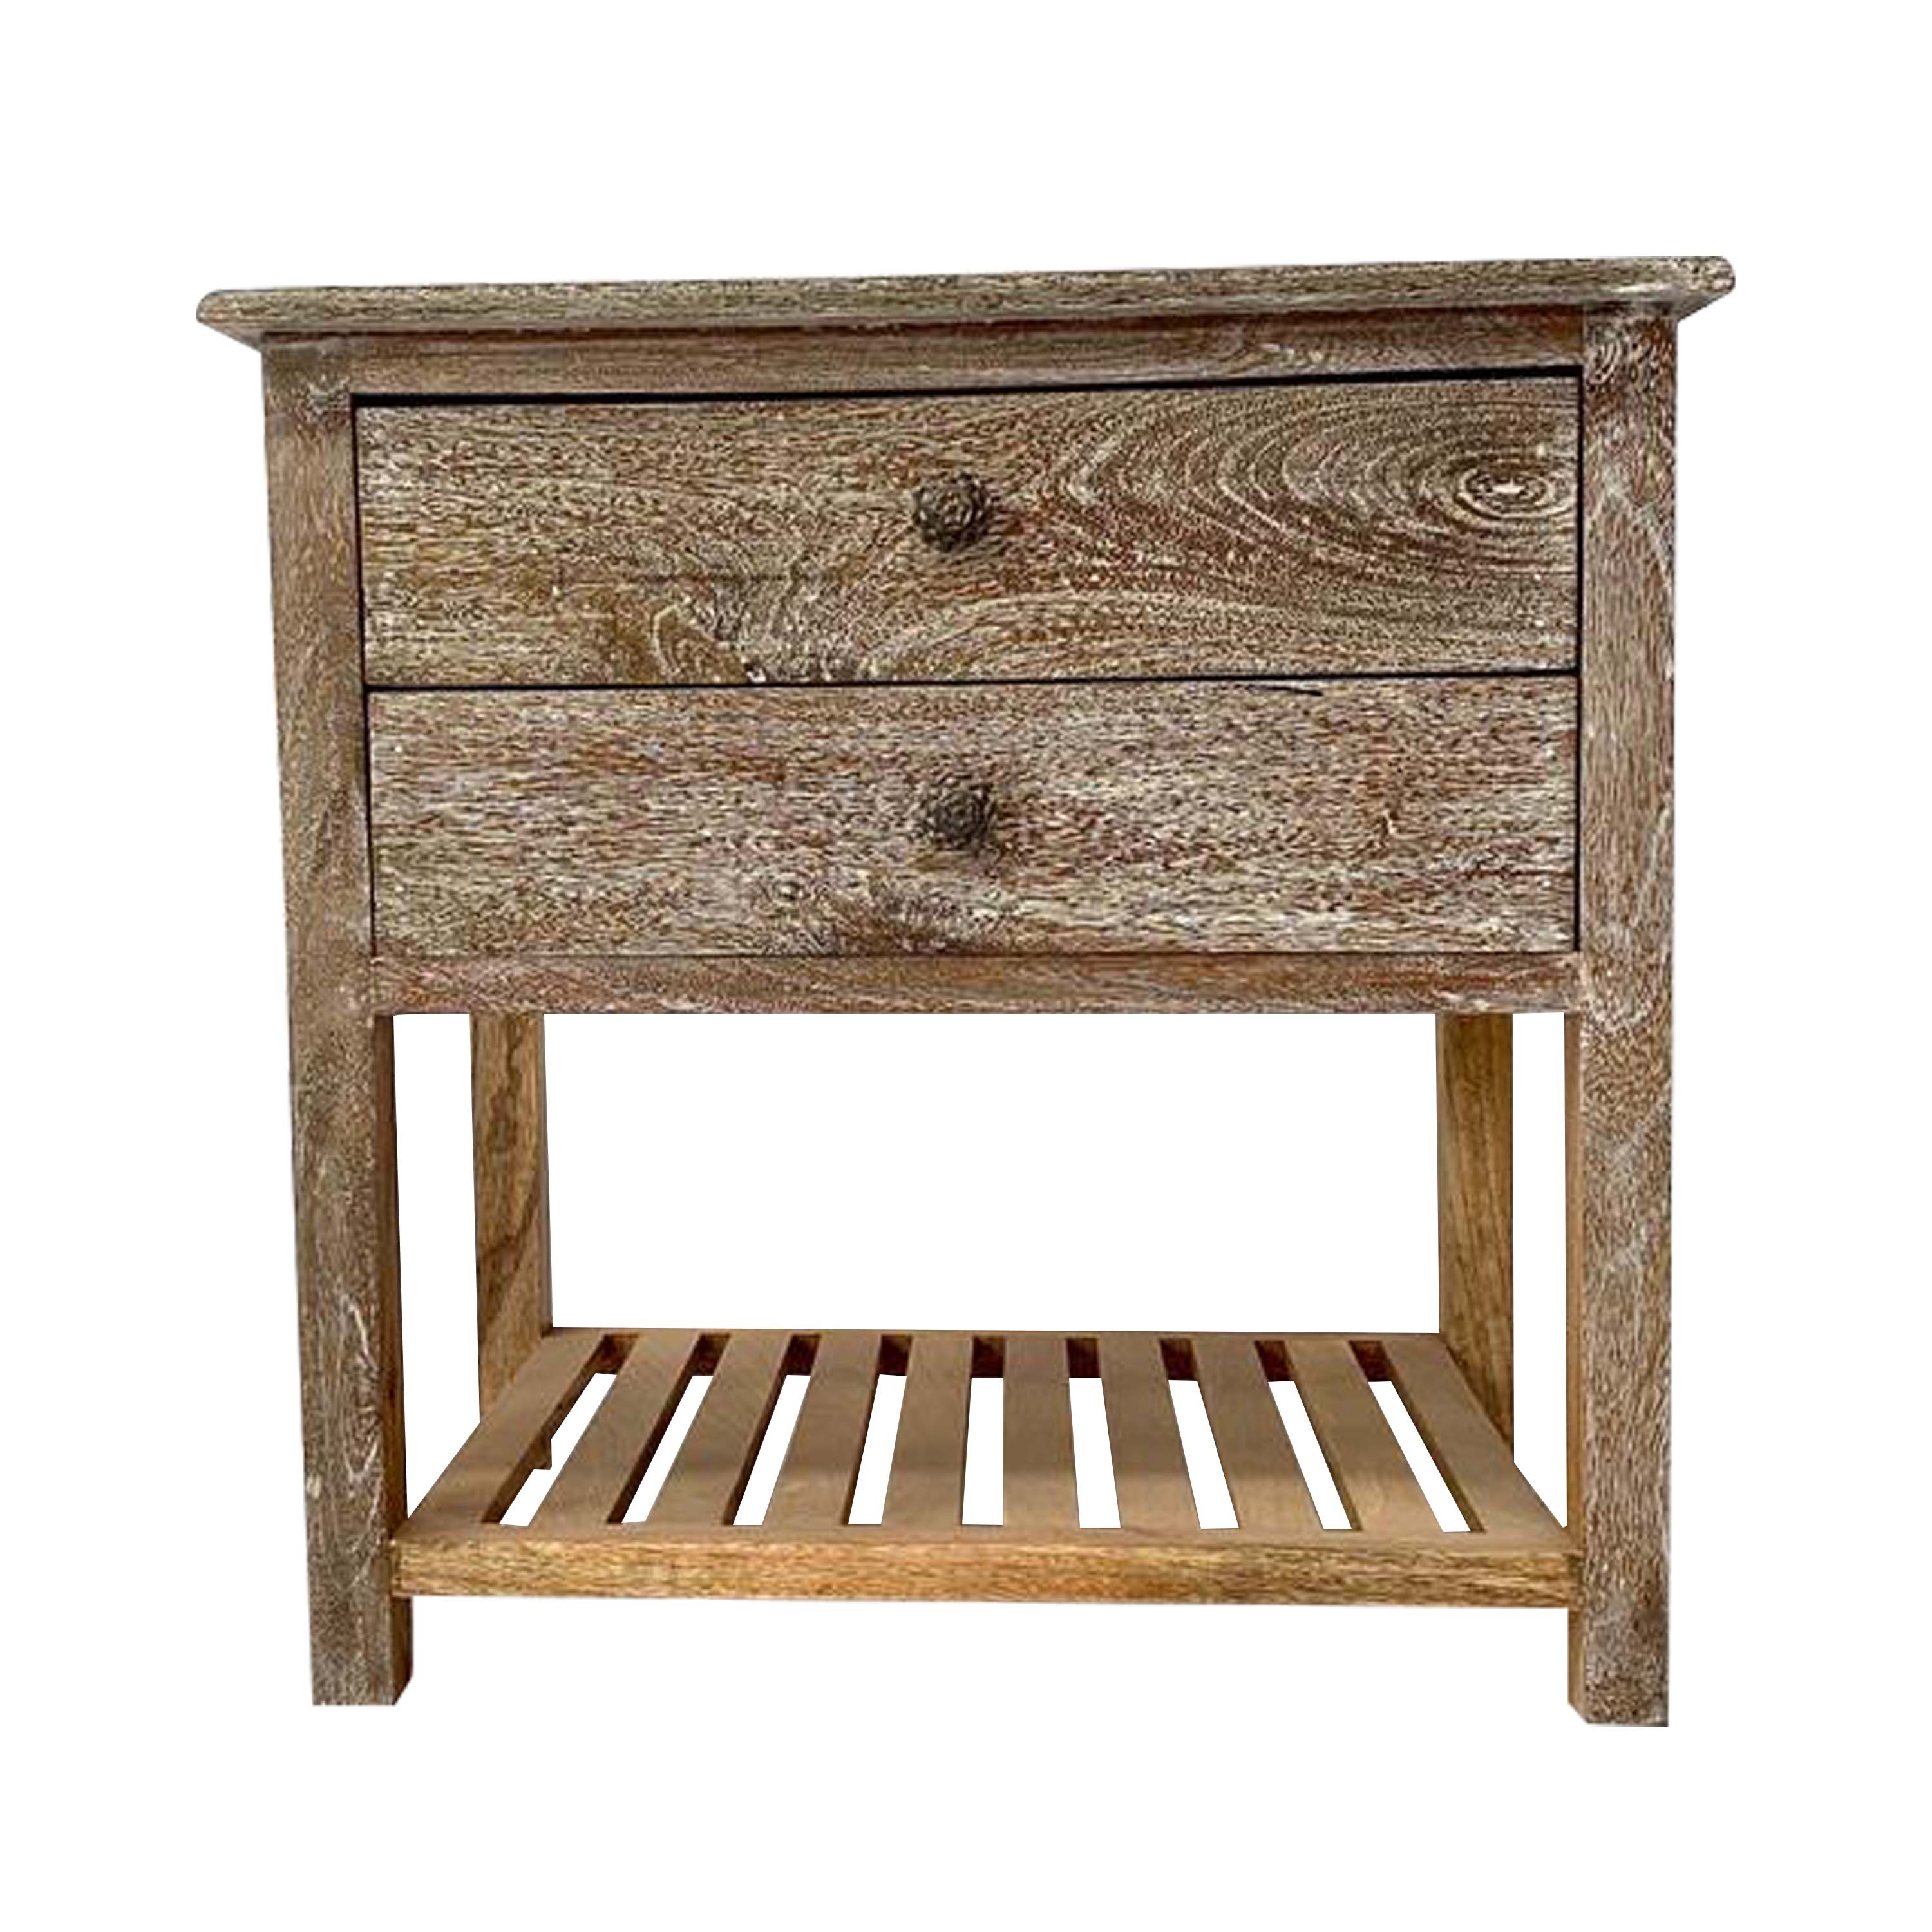 Side Table / Bed side Table in solid wood with Weathered Finish